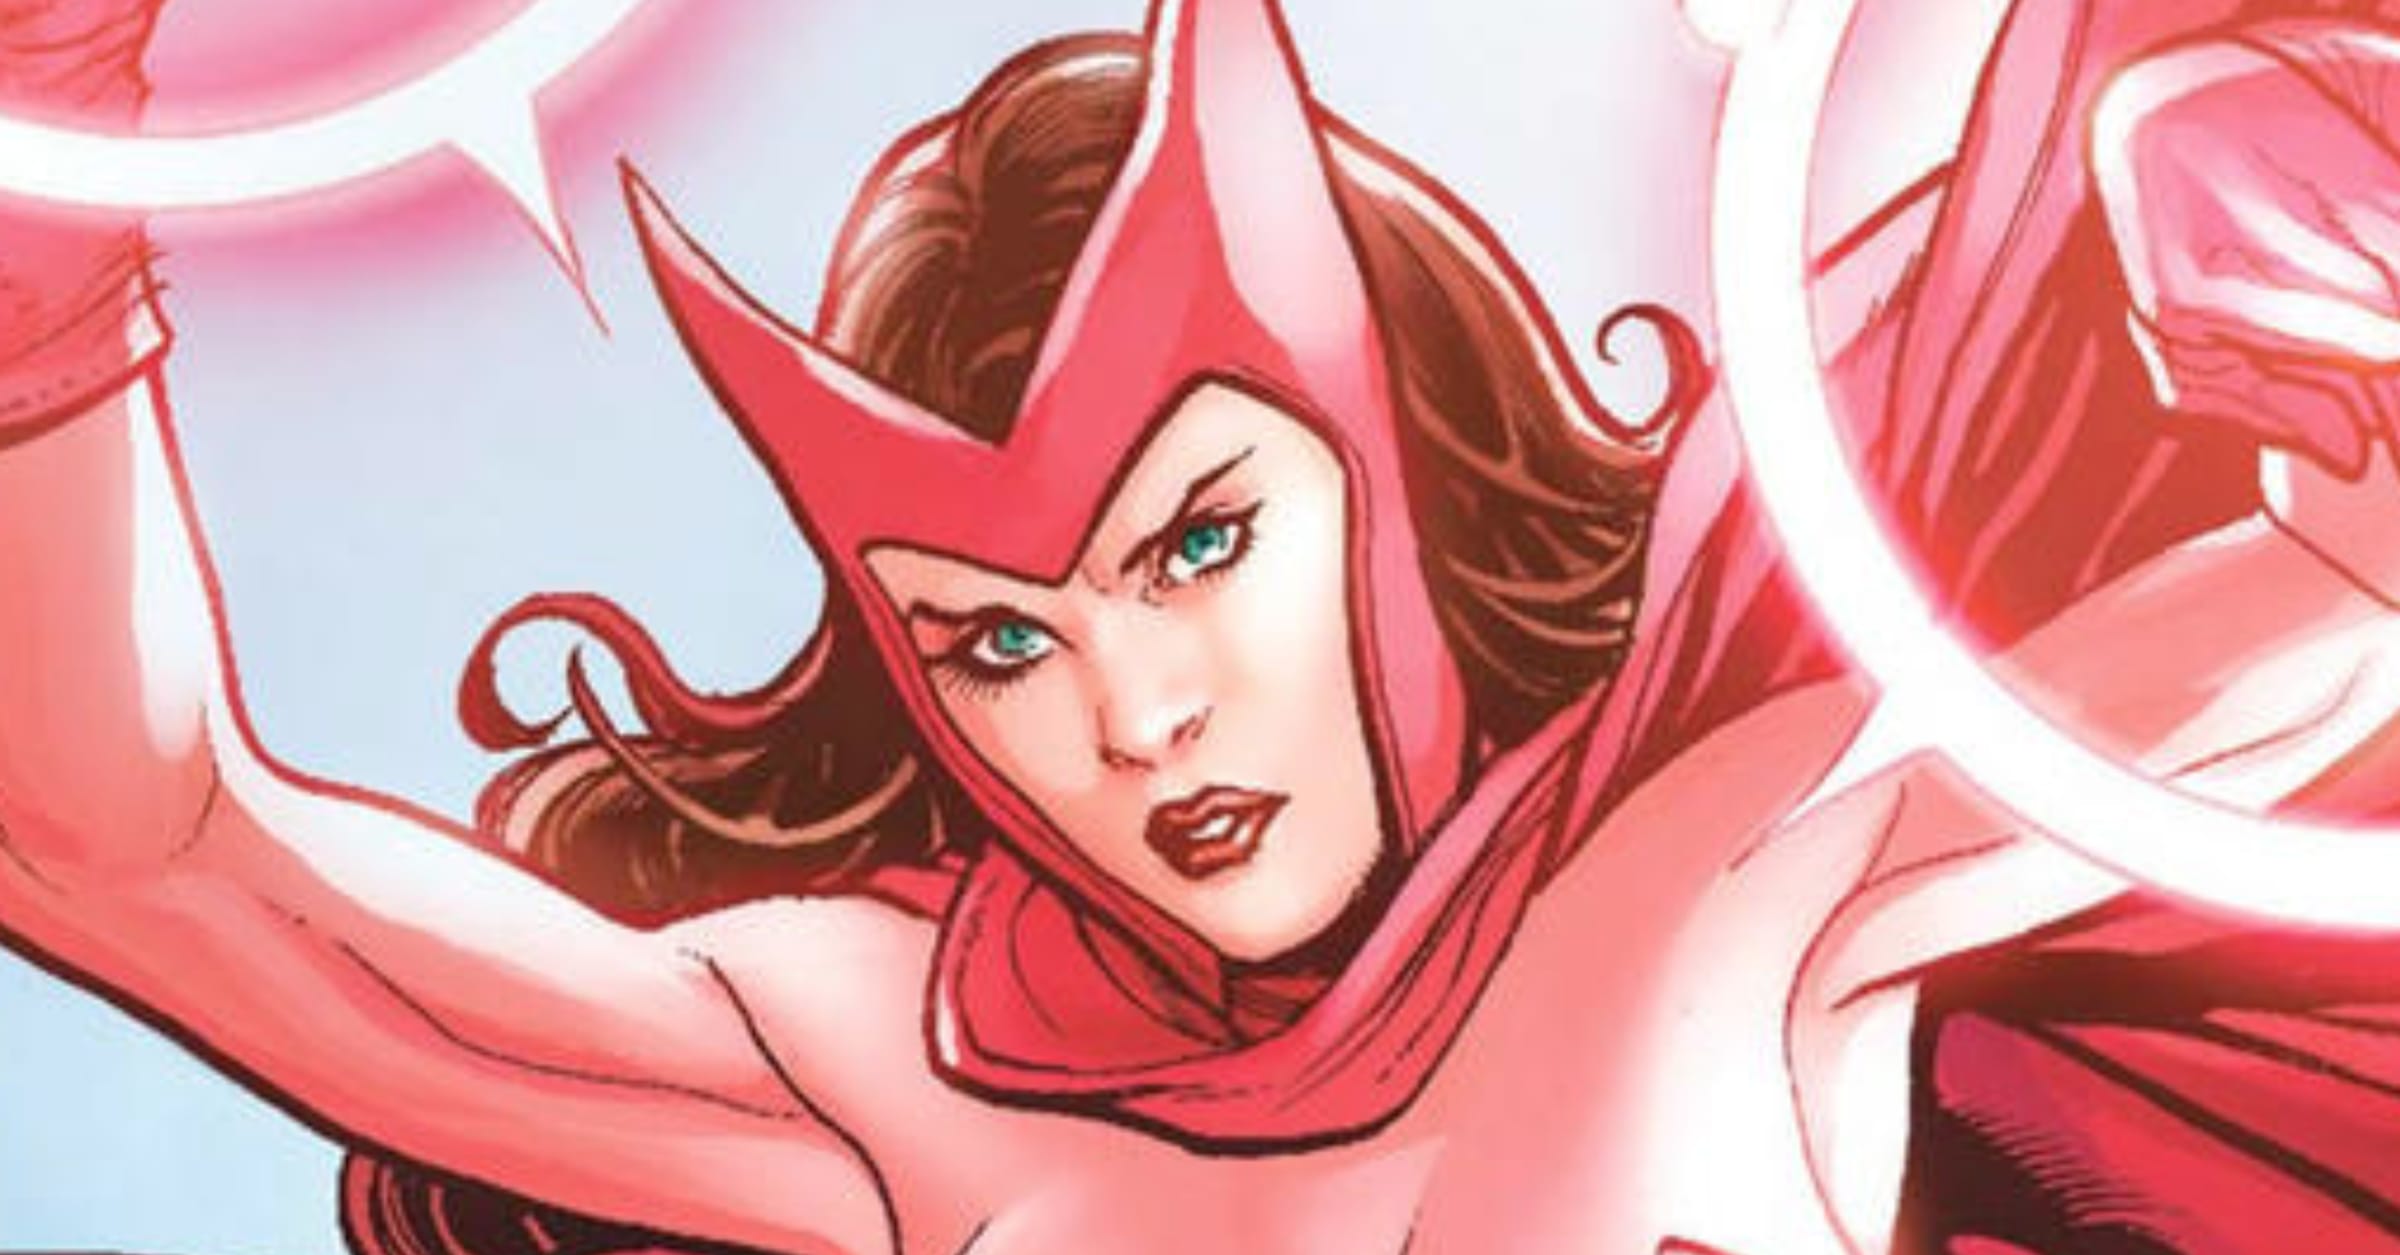 Scarlet Witch 1: Witches' Road by Robinson, James